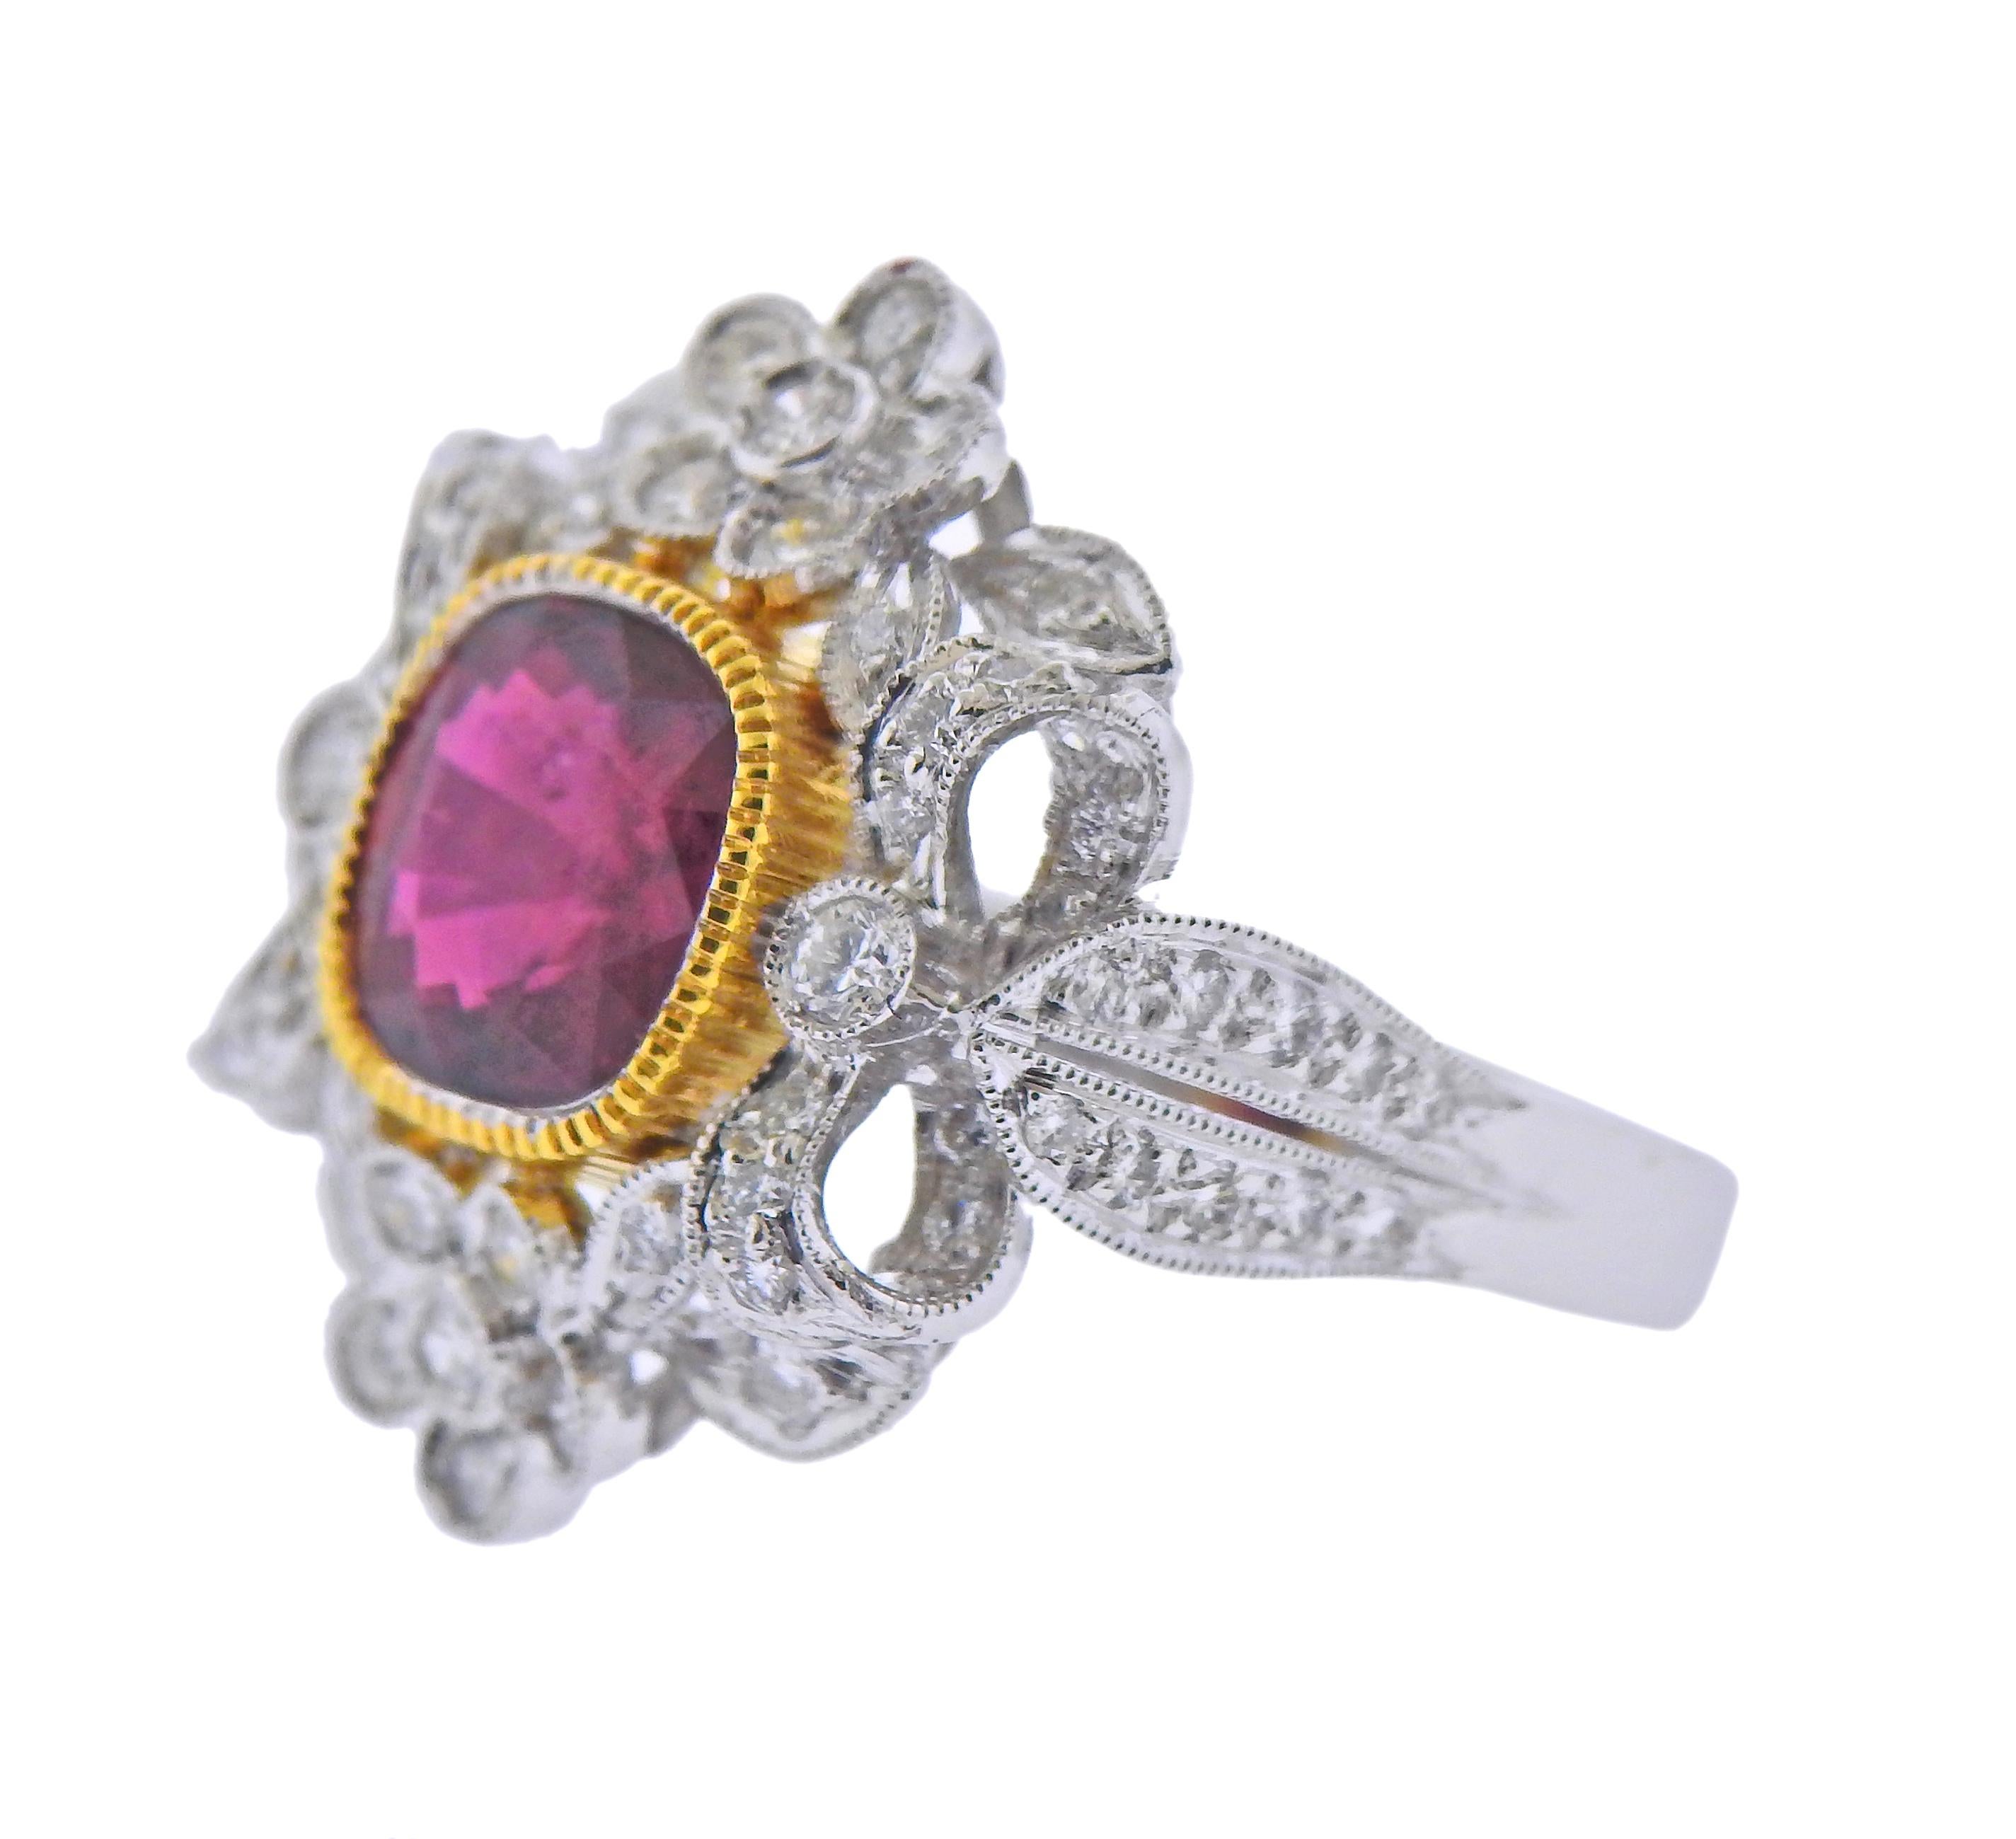 18k white and yellow gold ring with a center approx. 2.20ct ruby (measuring 8 x 7.6 x 4.1mm), surrounded with approx. 0.76ctw in diamonds. Ring size - 6.75, ring top - 21mm x 22mm. Marked 750. Weight - 7.9 grams. 